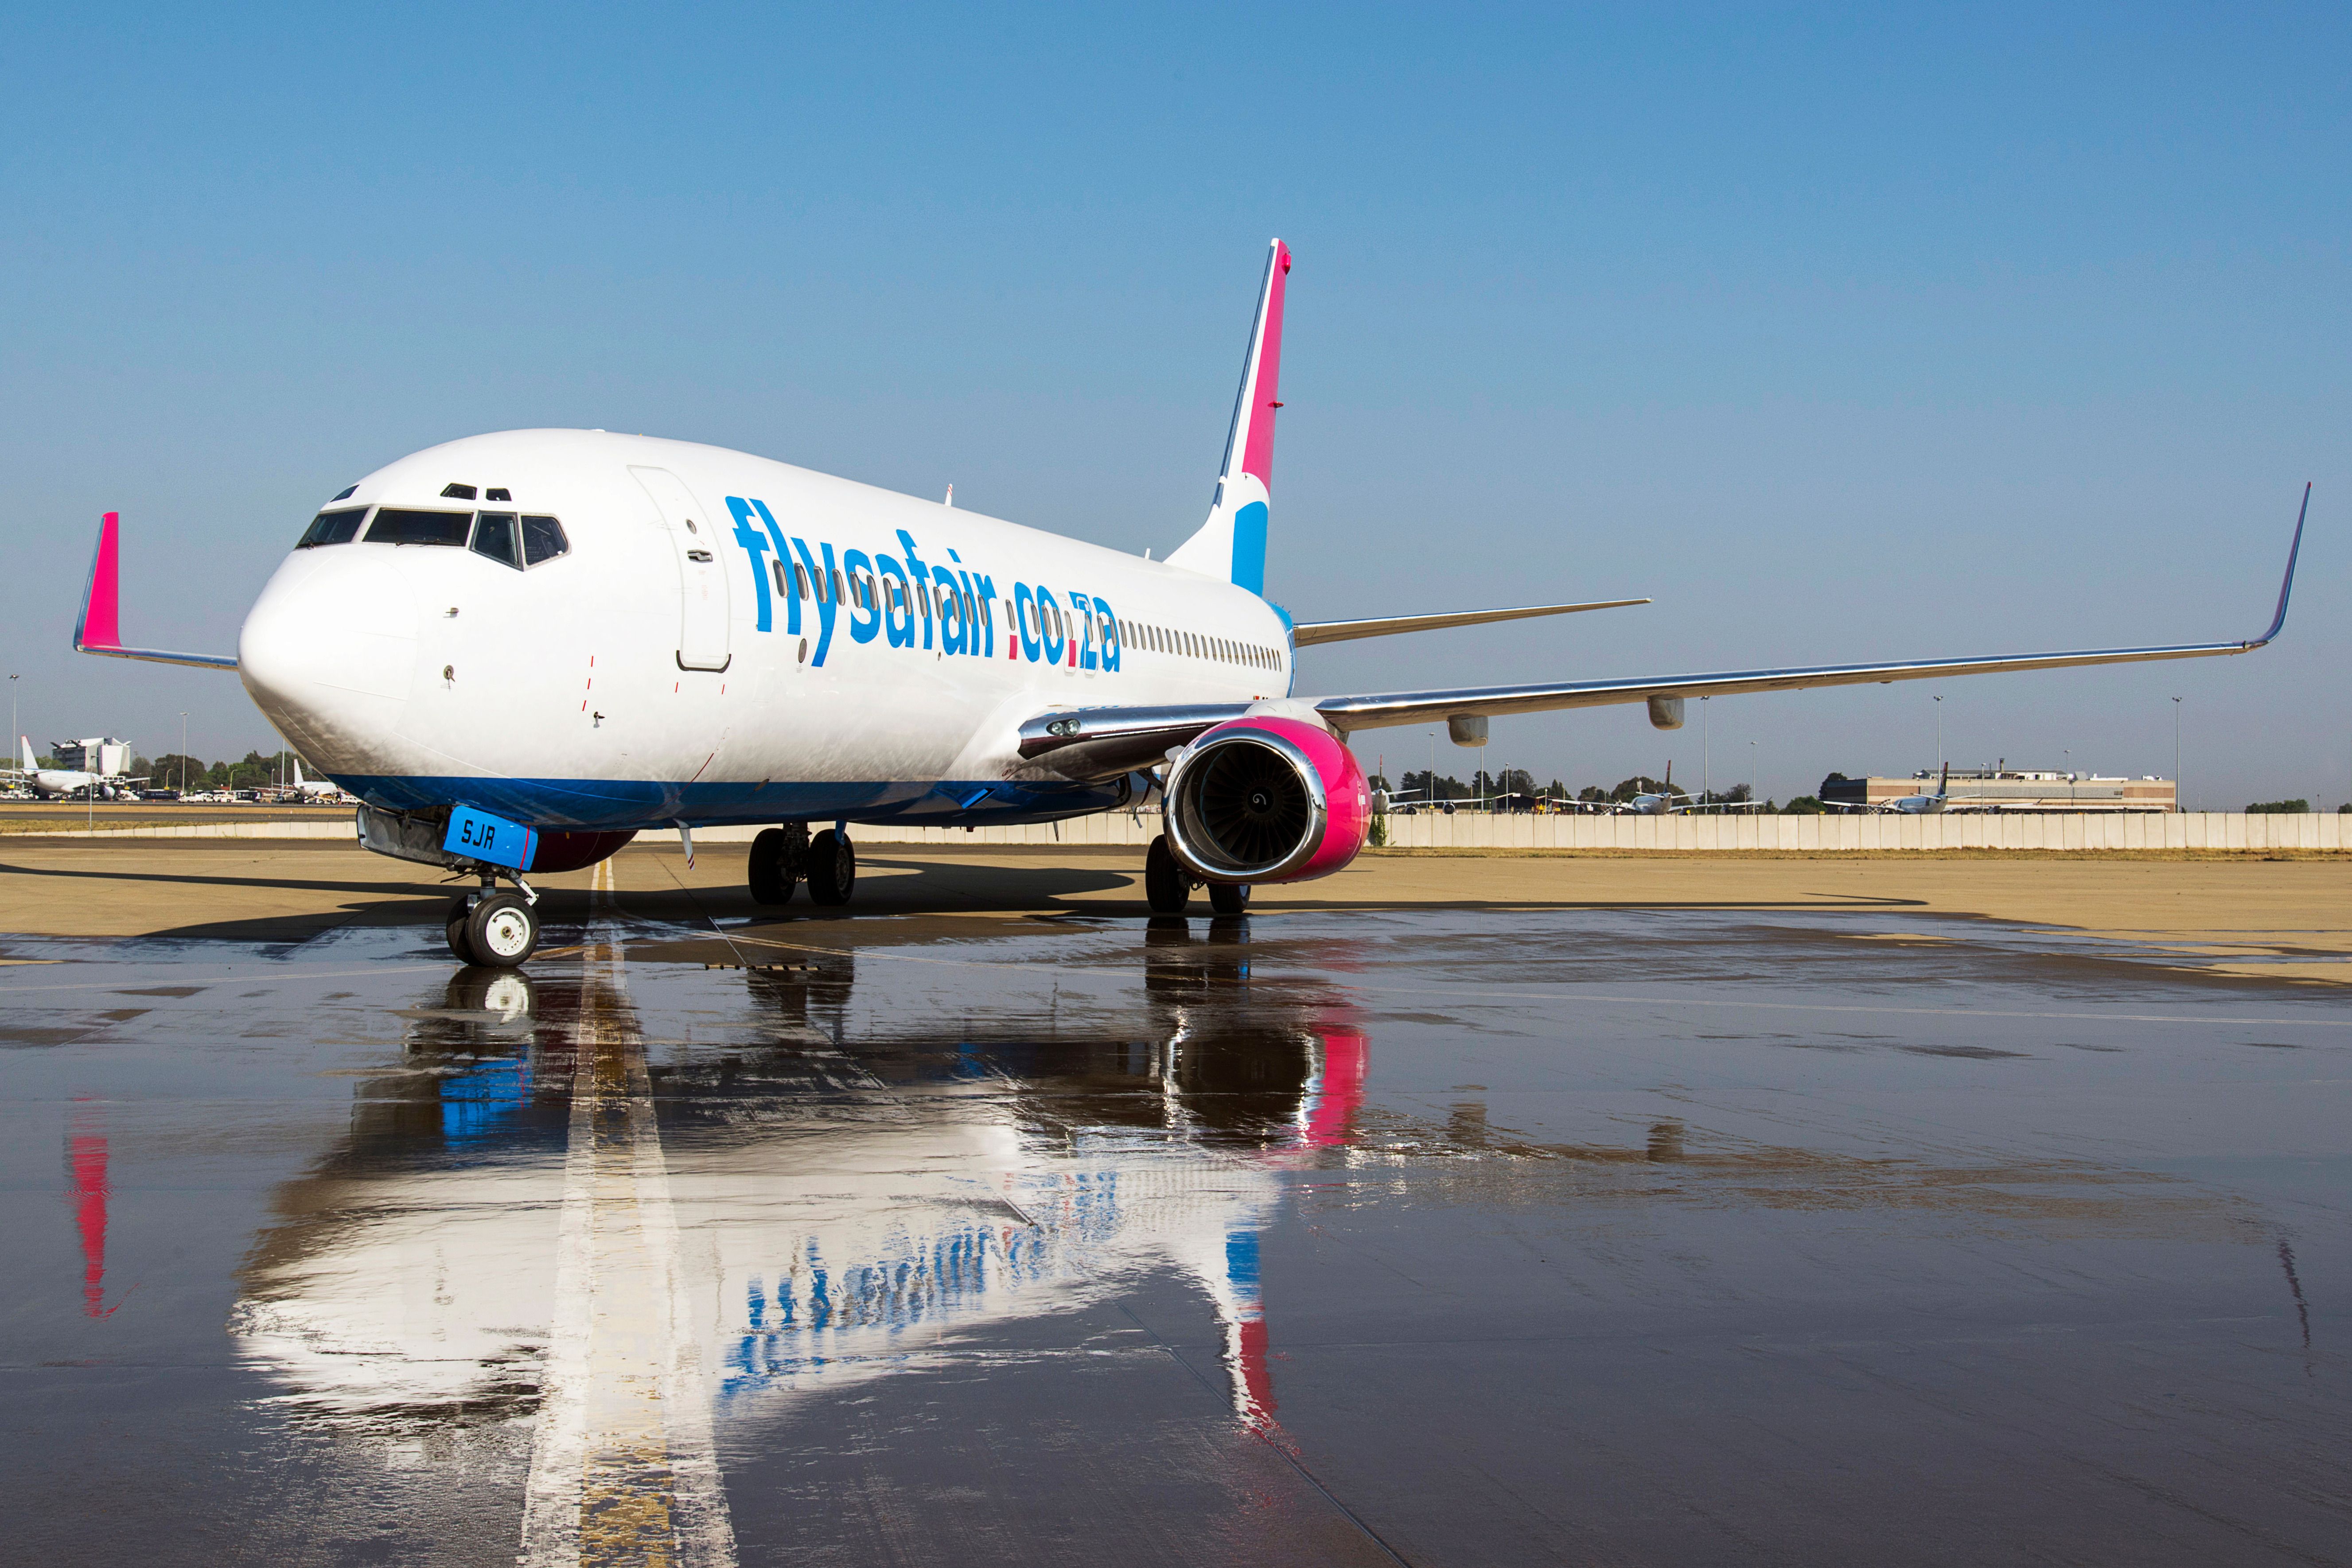 A FlySafair Boeing 737 parked on an airport apron.